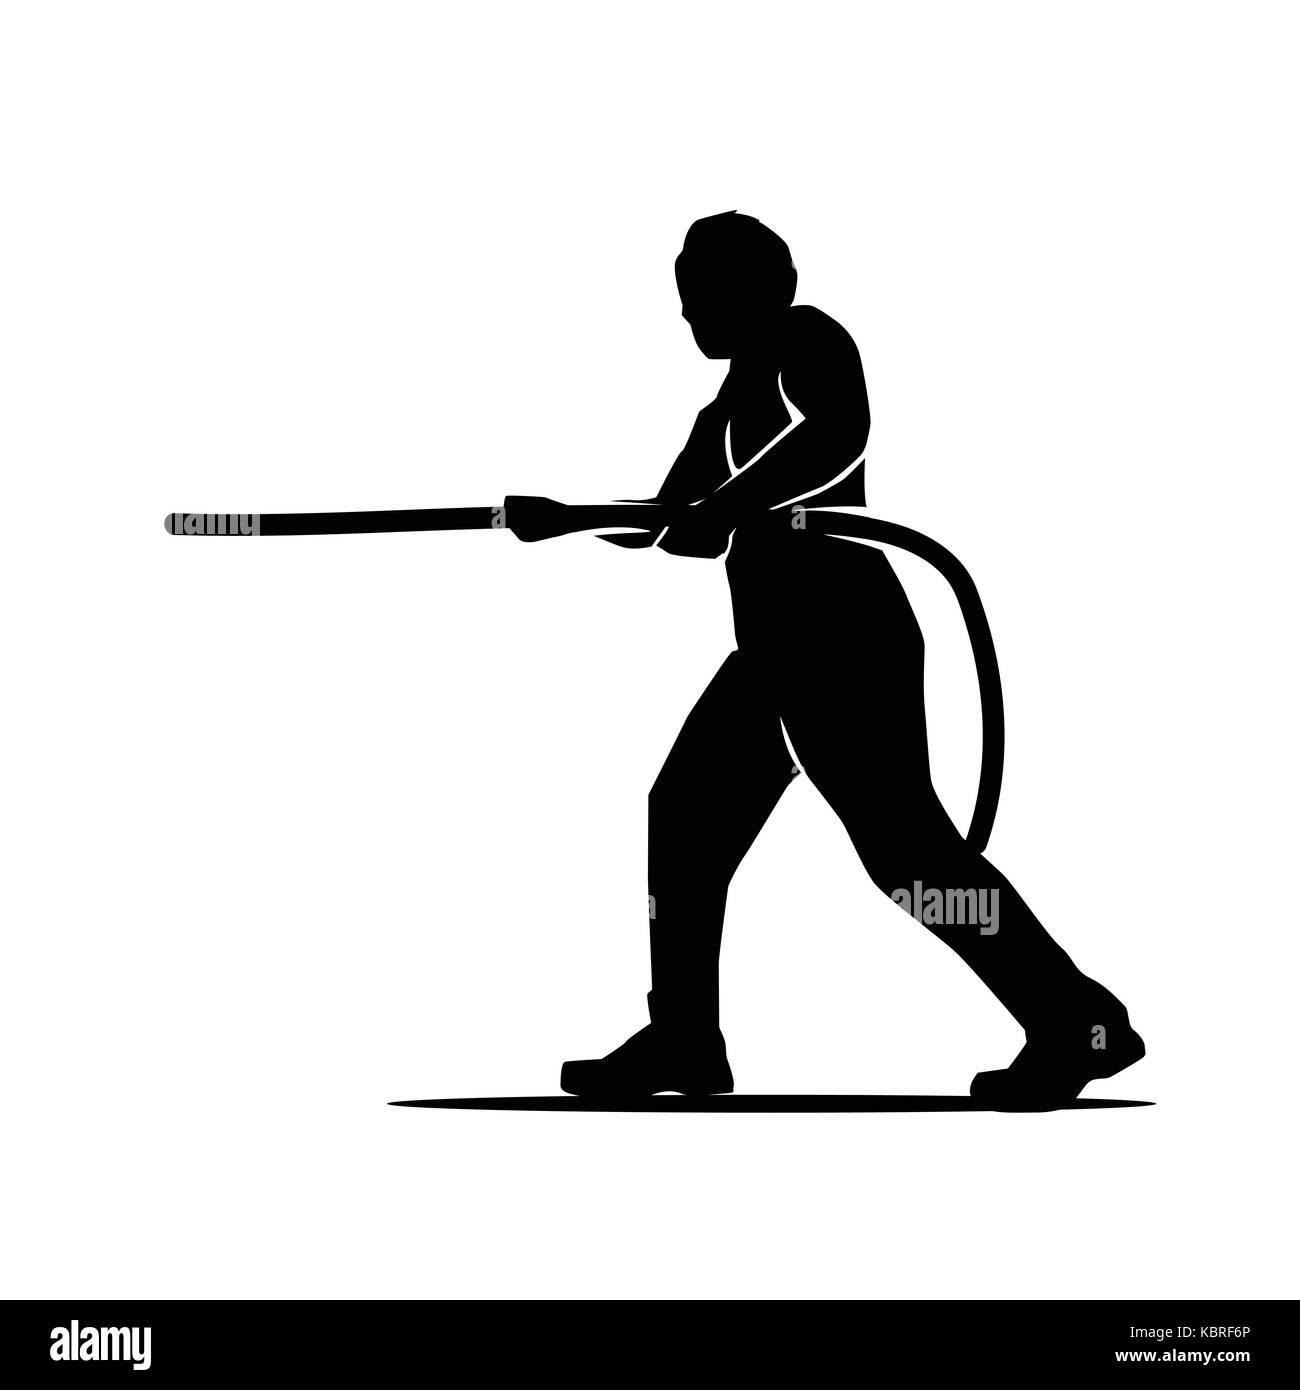 Man pull a rope silhouette, silhouette design, isolated on white